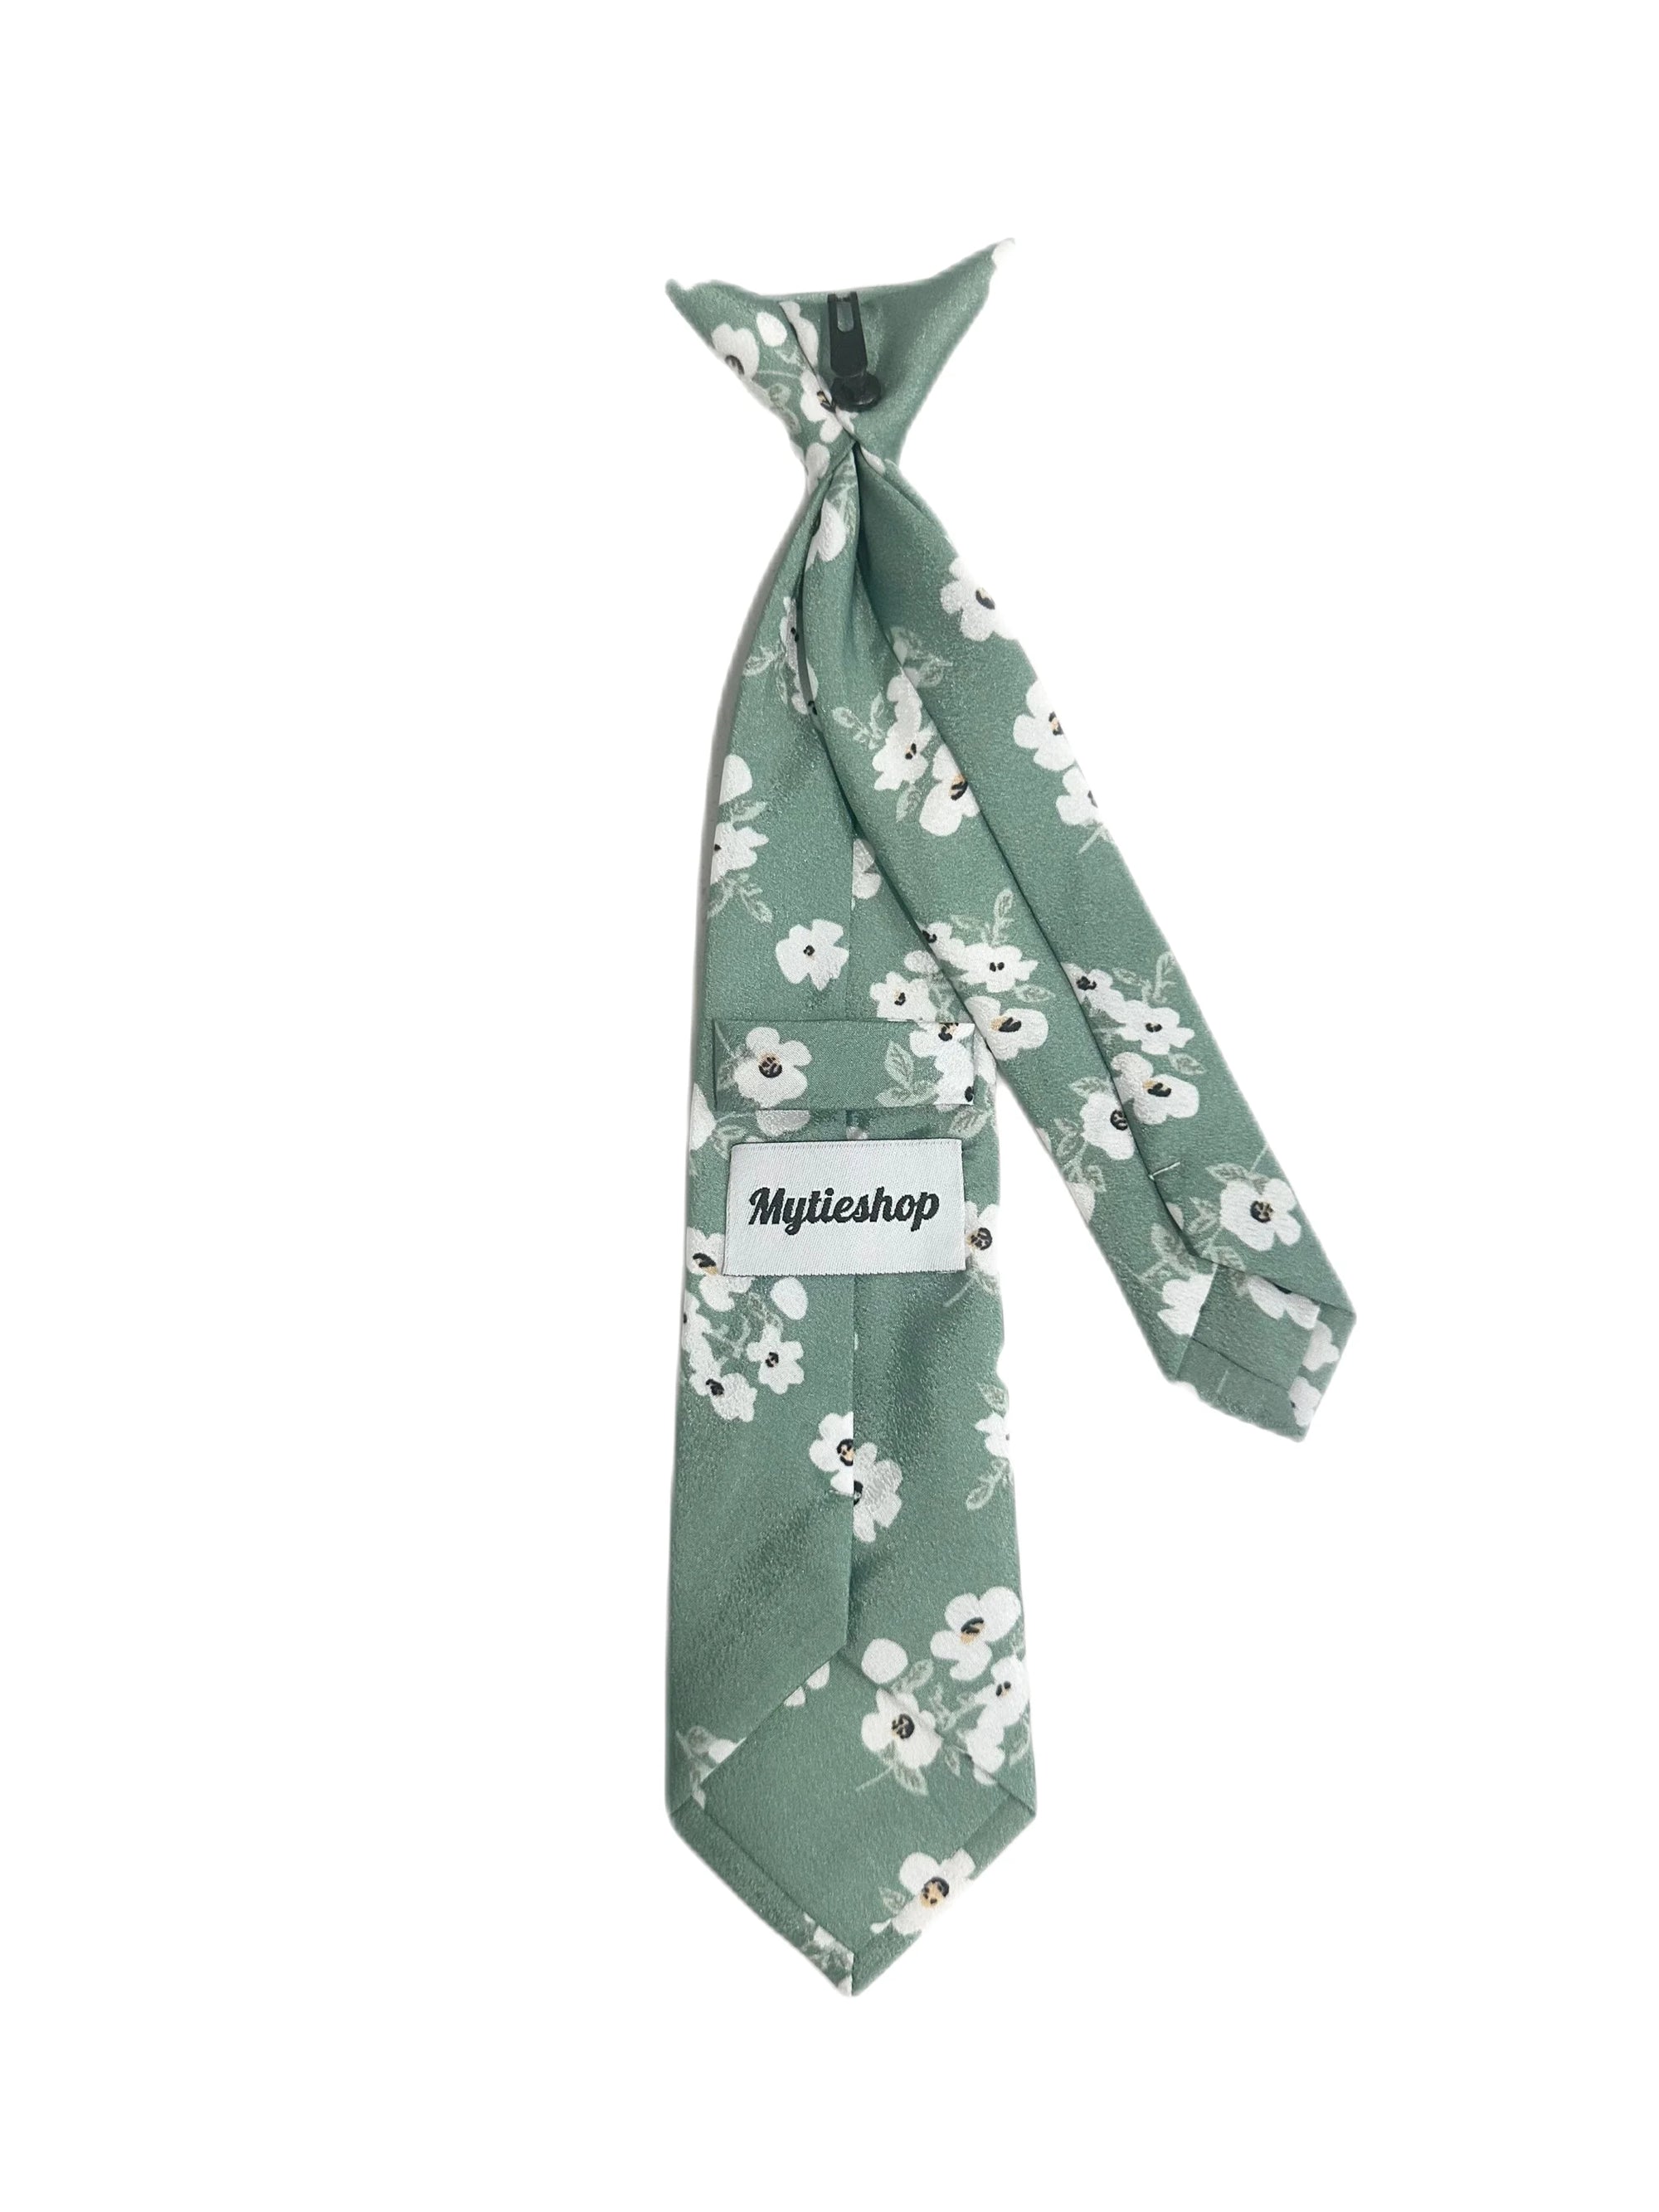 Green Floral Tie for kids Material:Cotton Blend Approx Size: Max width: 6.5 cm / 2.4 inches 9-24 months 26 CM 2-5 years 31 CM 9-11 Years 43 CM Color: Green Great for: Prom Dinners Interviews Photo shoots Photo sessions Dates Engagement pictures Western weddings Floral Cotton necktie for babies and kids for weddings and events. 